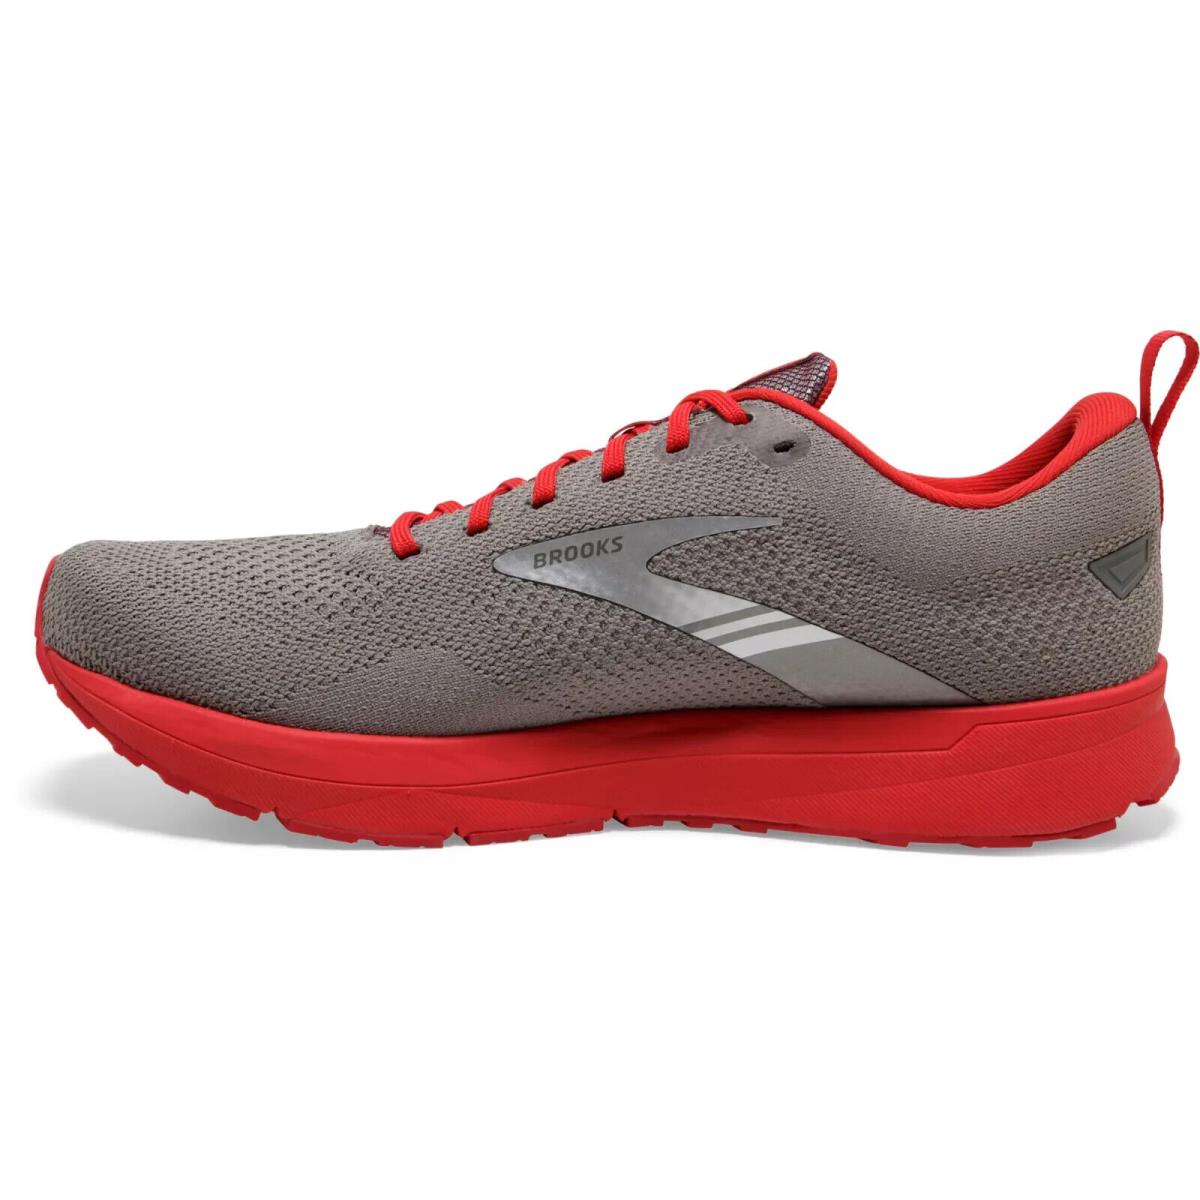 Brooks shoes Revel - Grey/Red 0